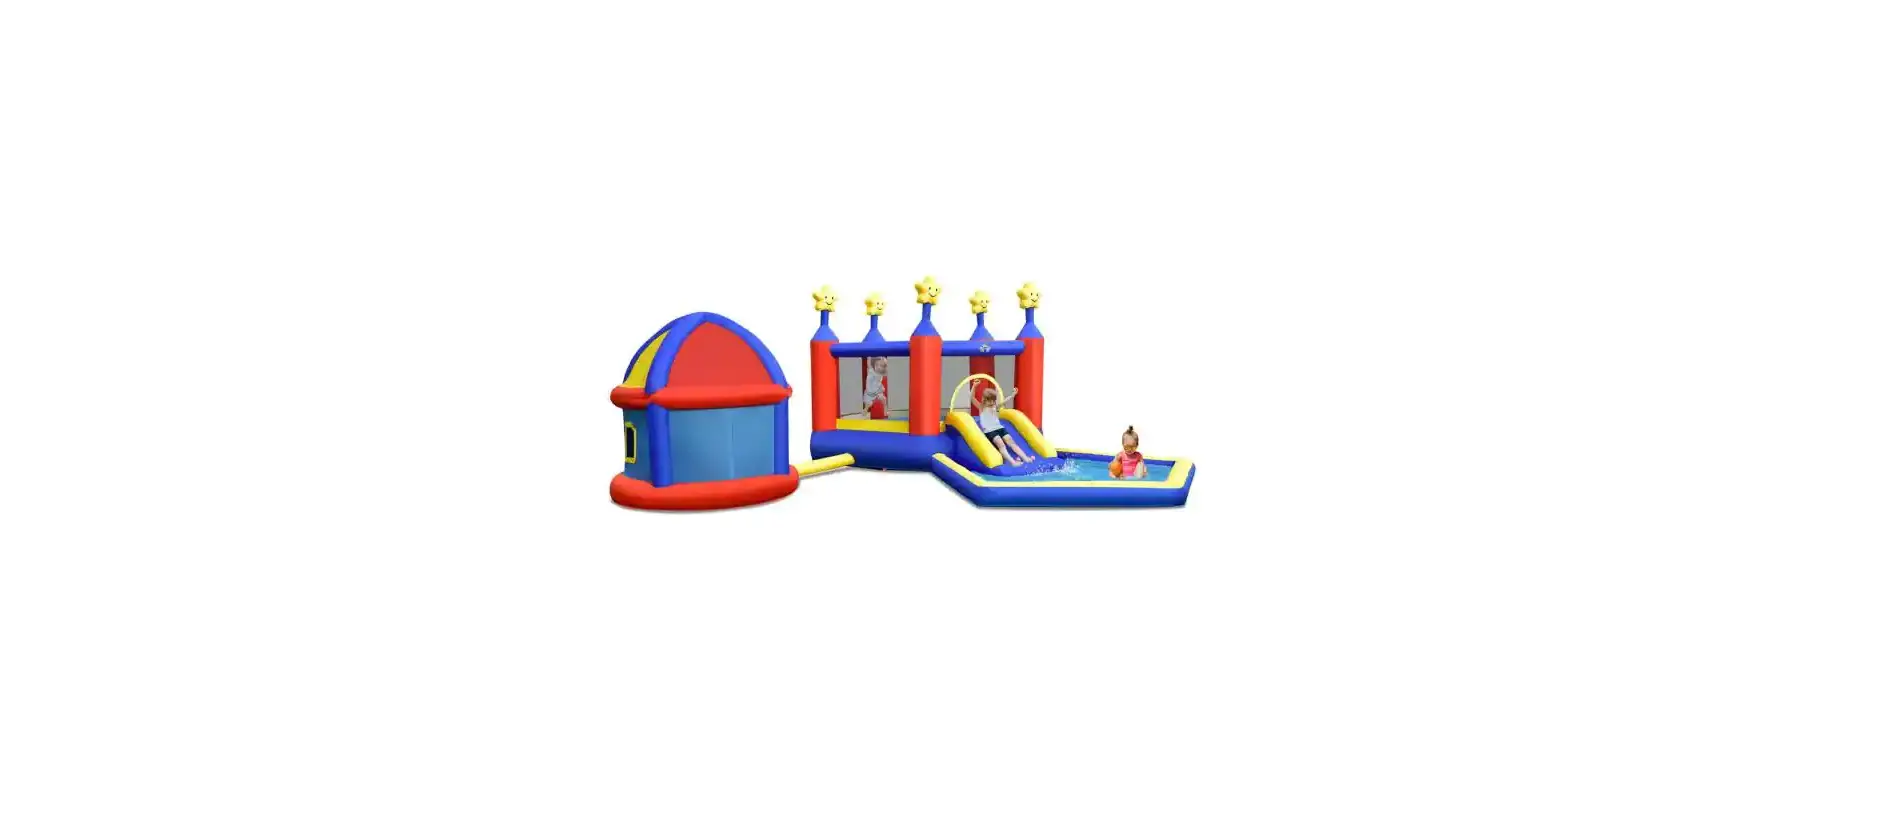 GYM09783 Inflatable Bouncer Jumping Area Playhouse